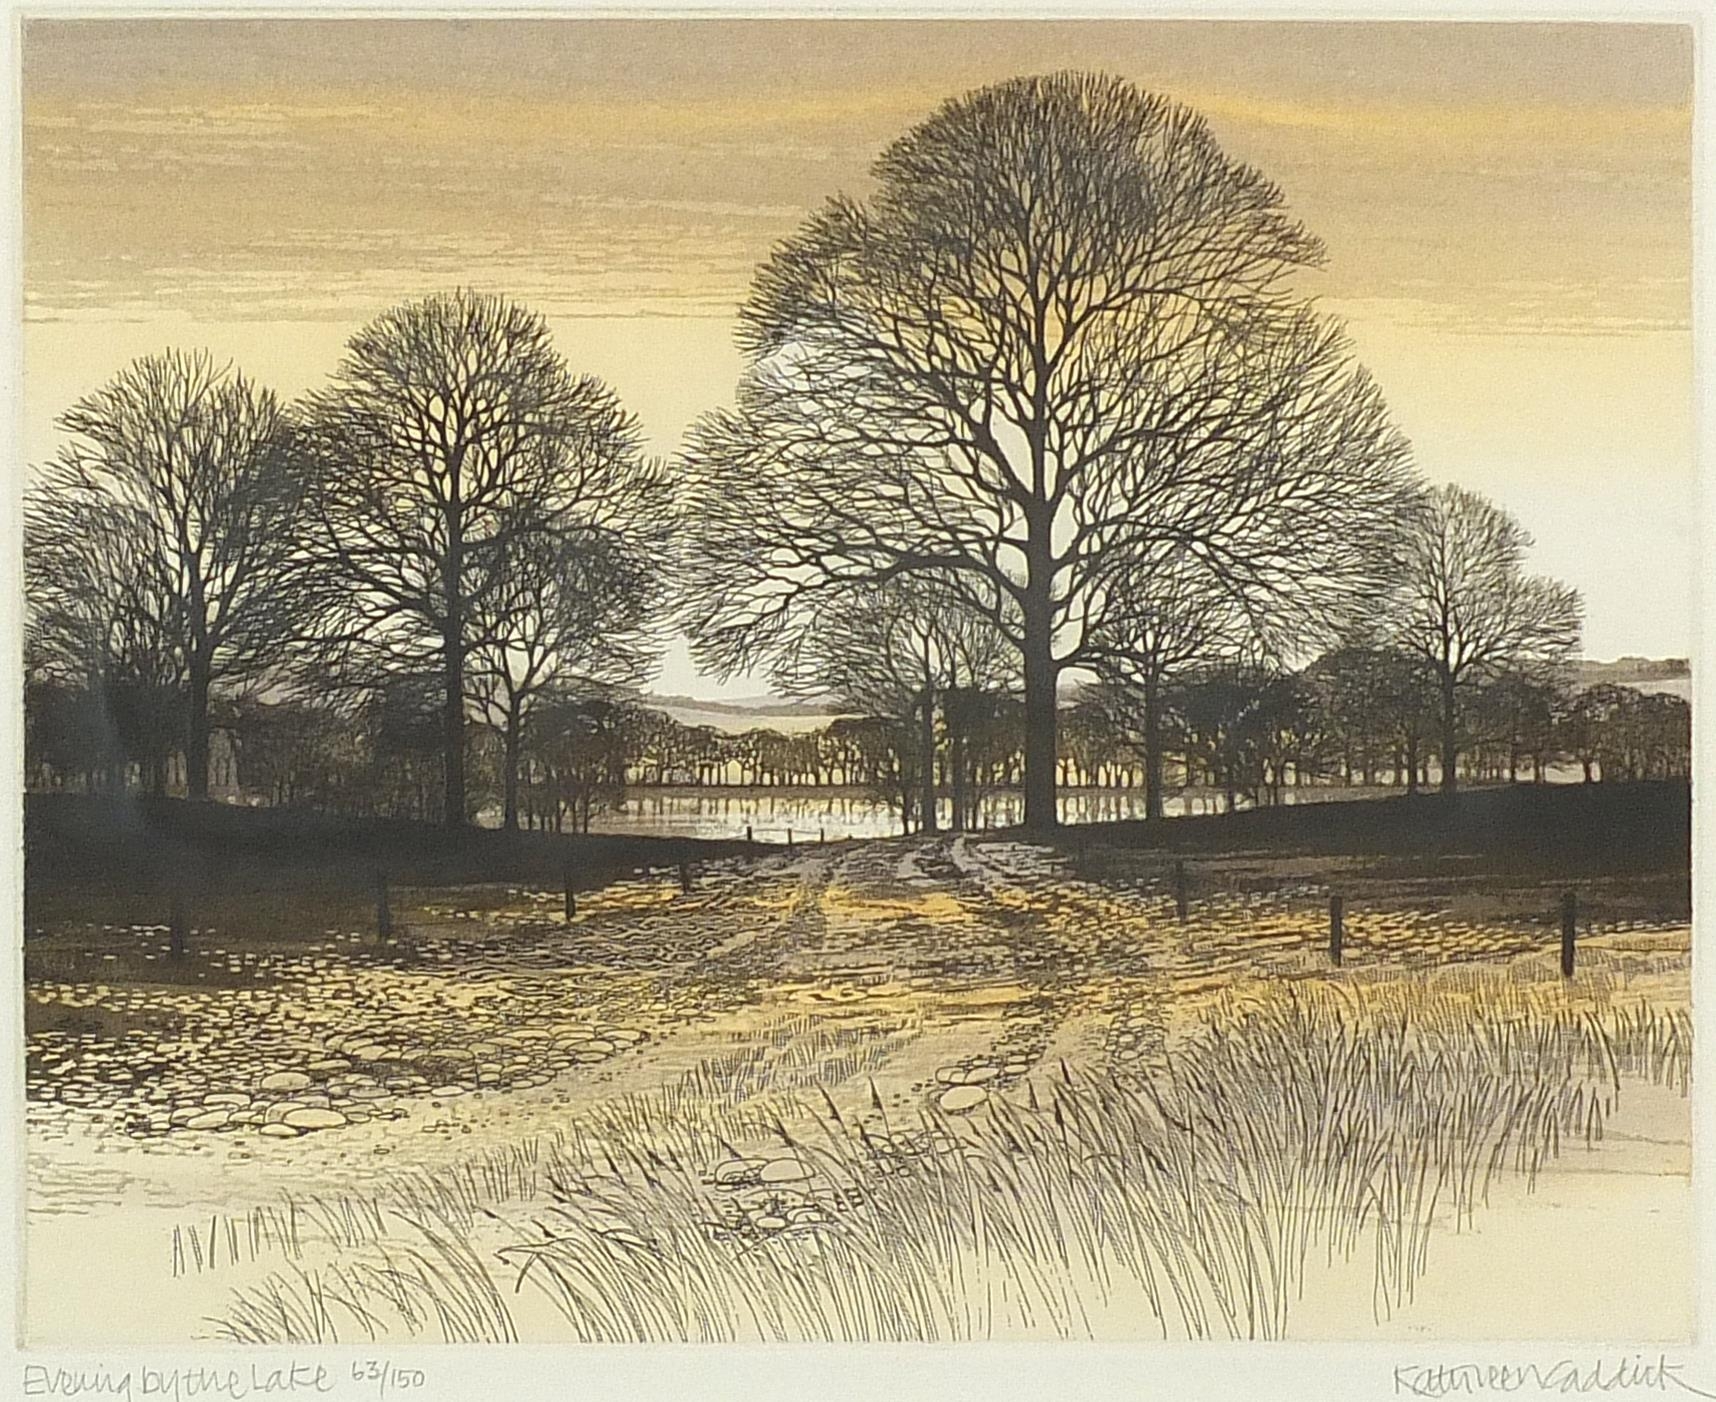 Kathleen Caddick - Road to the Moors, Evening by the Lake, Evening Walk and Melting Snow, four - Image 12 of 21